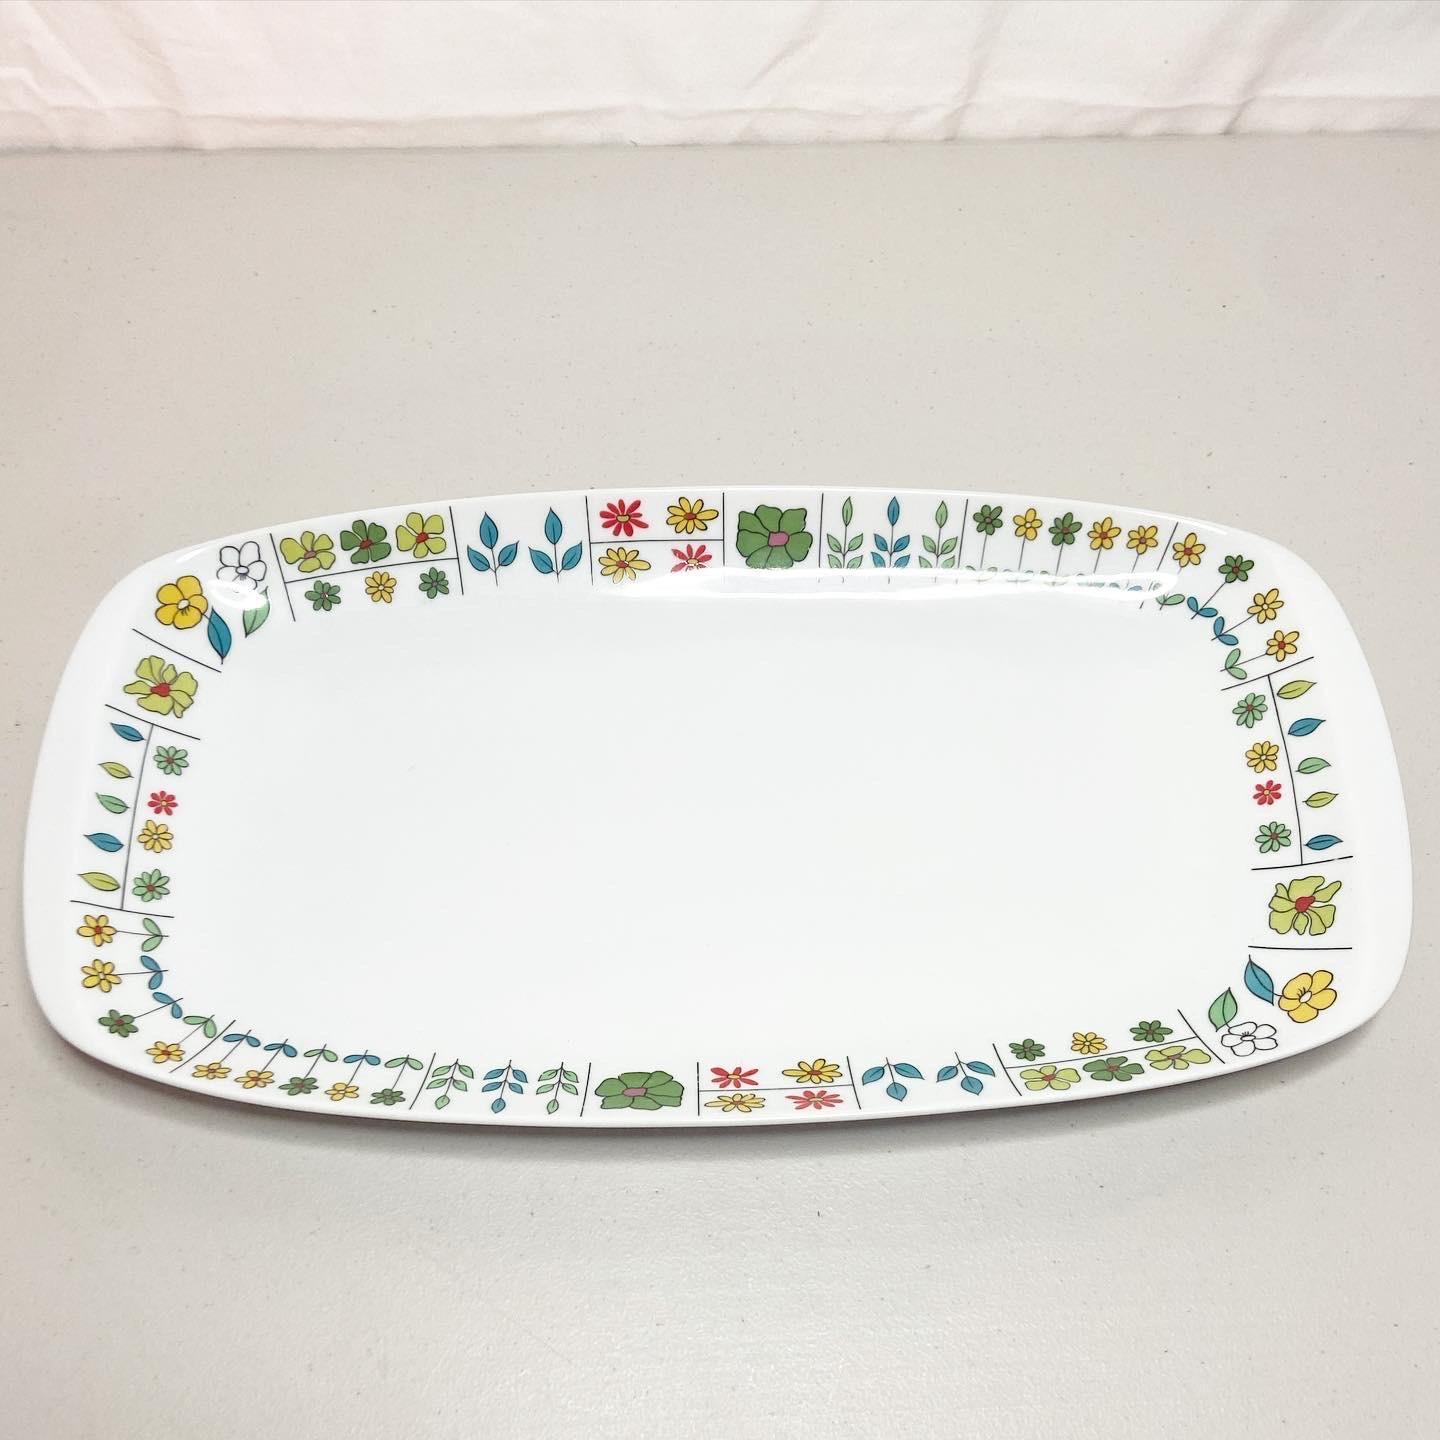 Mid-20th Century Collection of Piemonte Dinnerware by Emilio Pucci for Rosenthal Studio Line